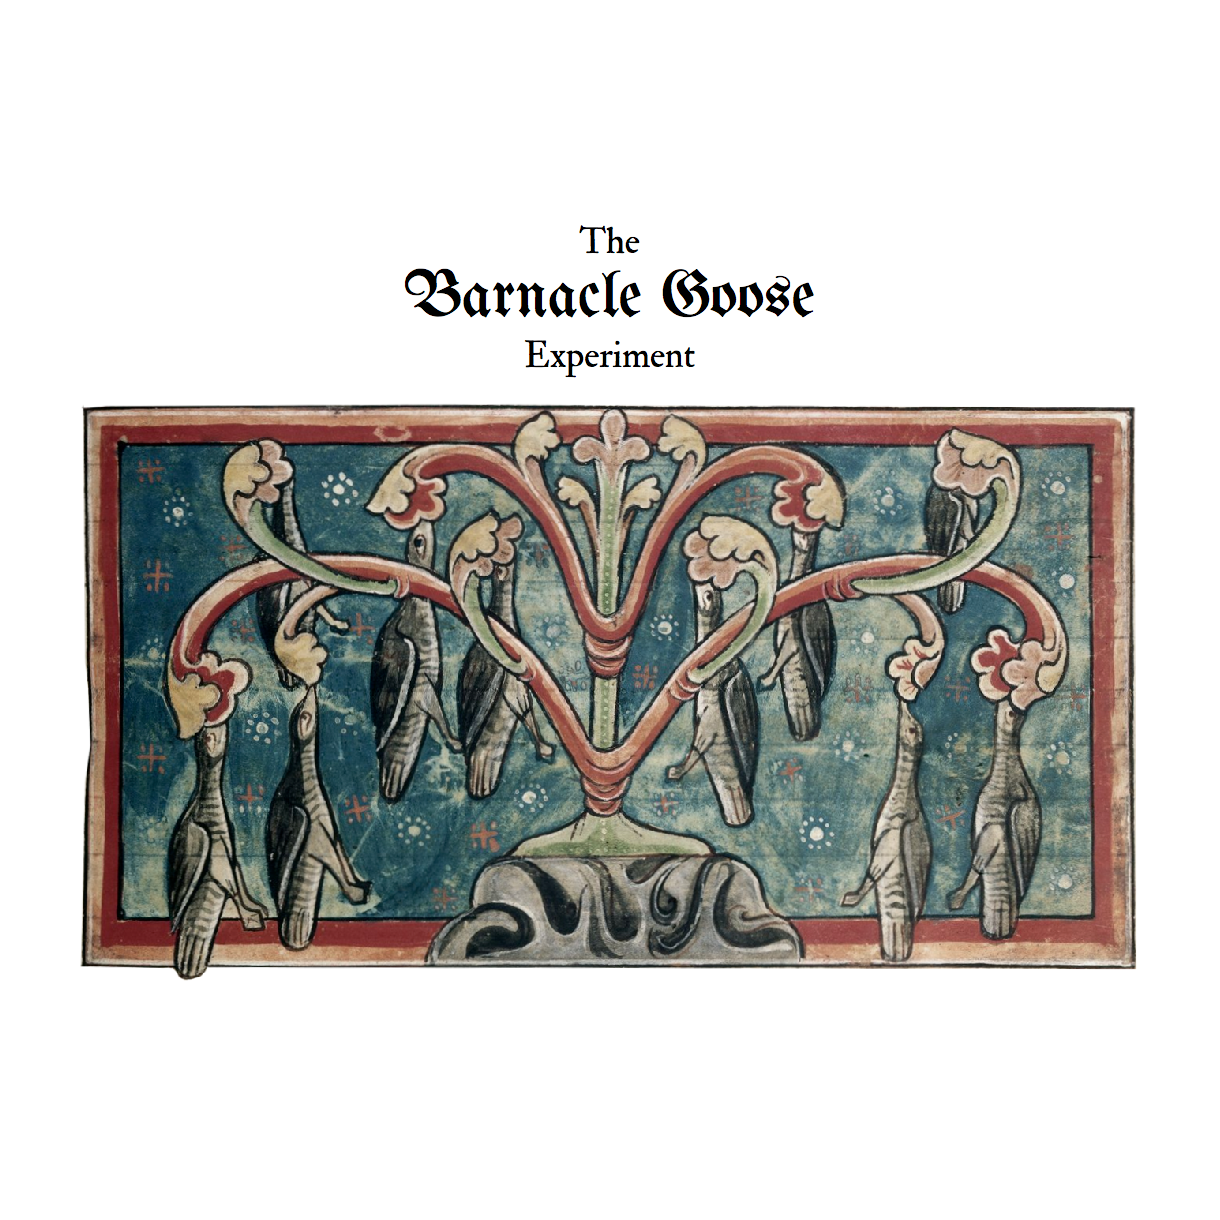 A square promotional image for The Barnacle Goose Experiment. It features the game title in gothic black text on a white background.